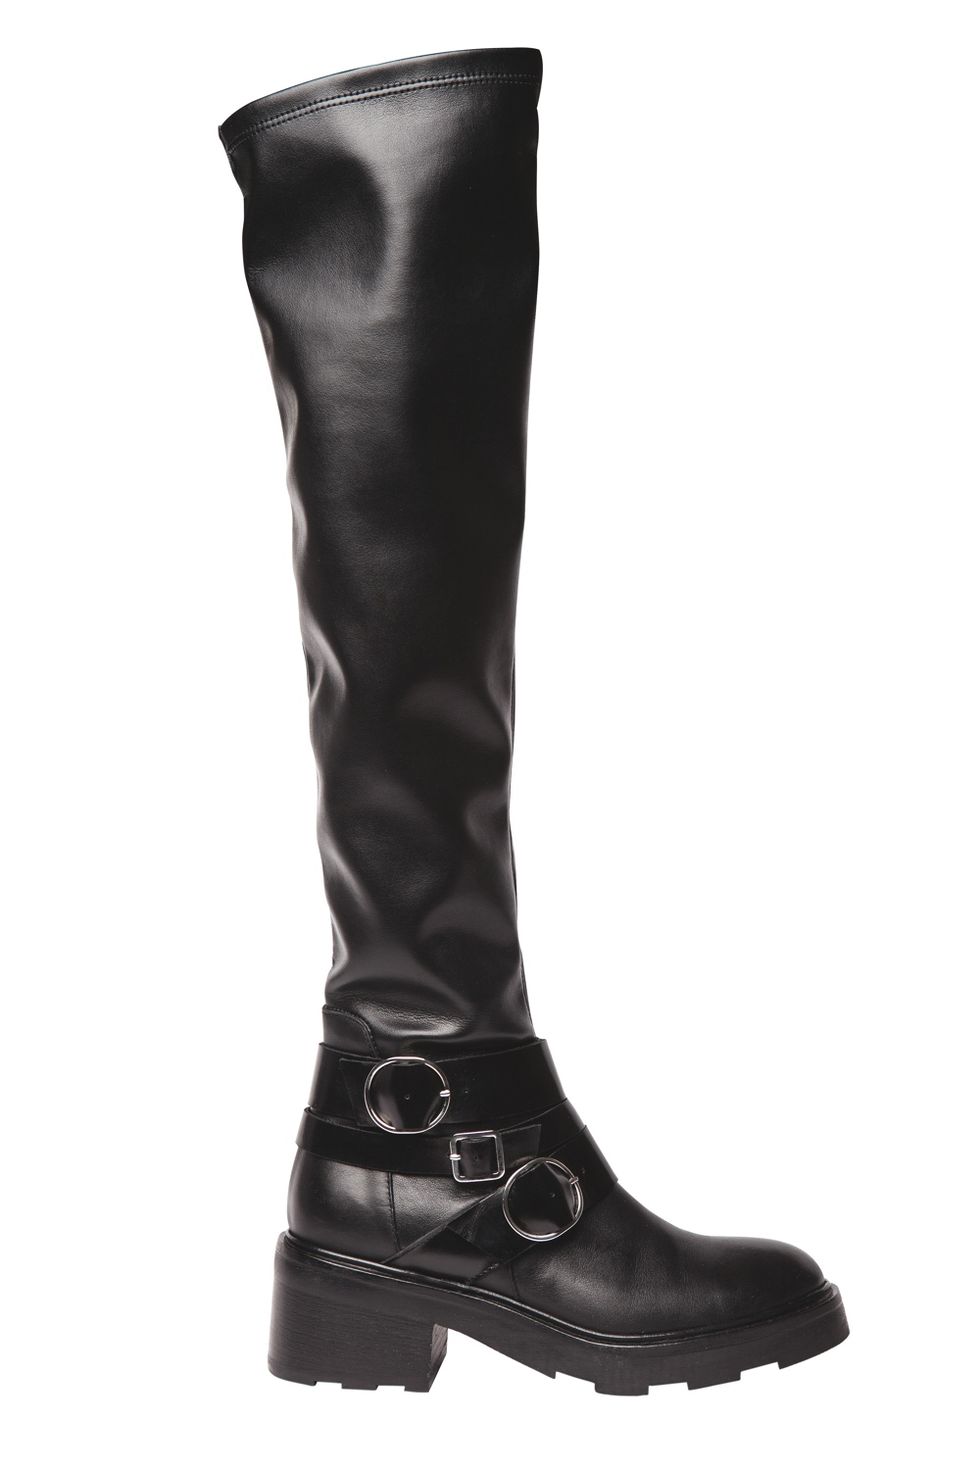 Footwear, Boot, Shoe, Riding boot, Knee-high boot, Durango boot, Brown, Work boots, Rain boot, Leather, 